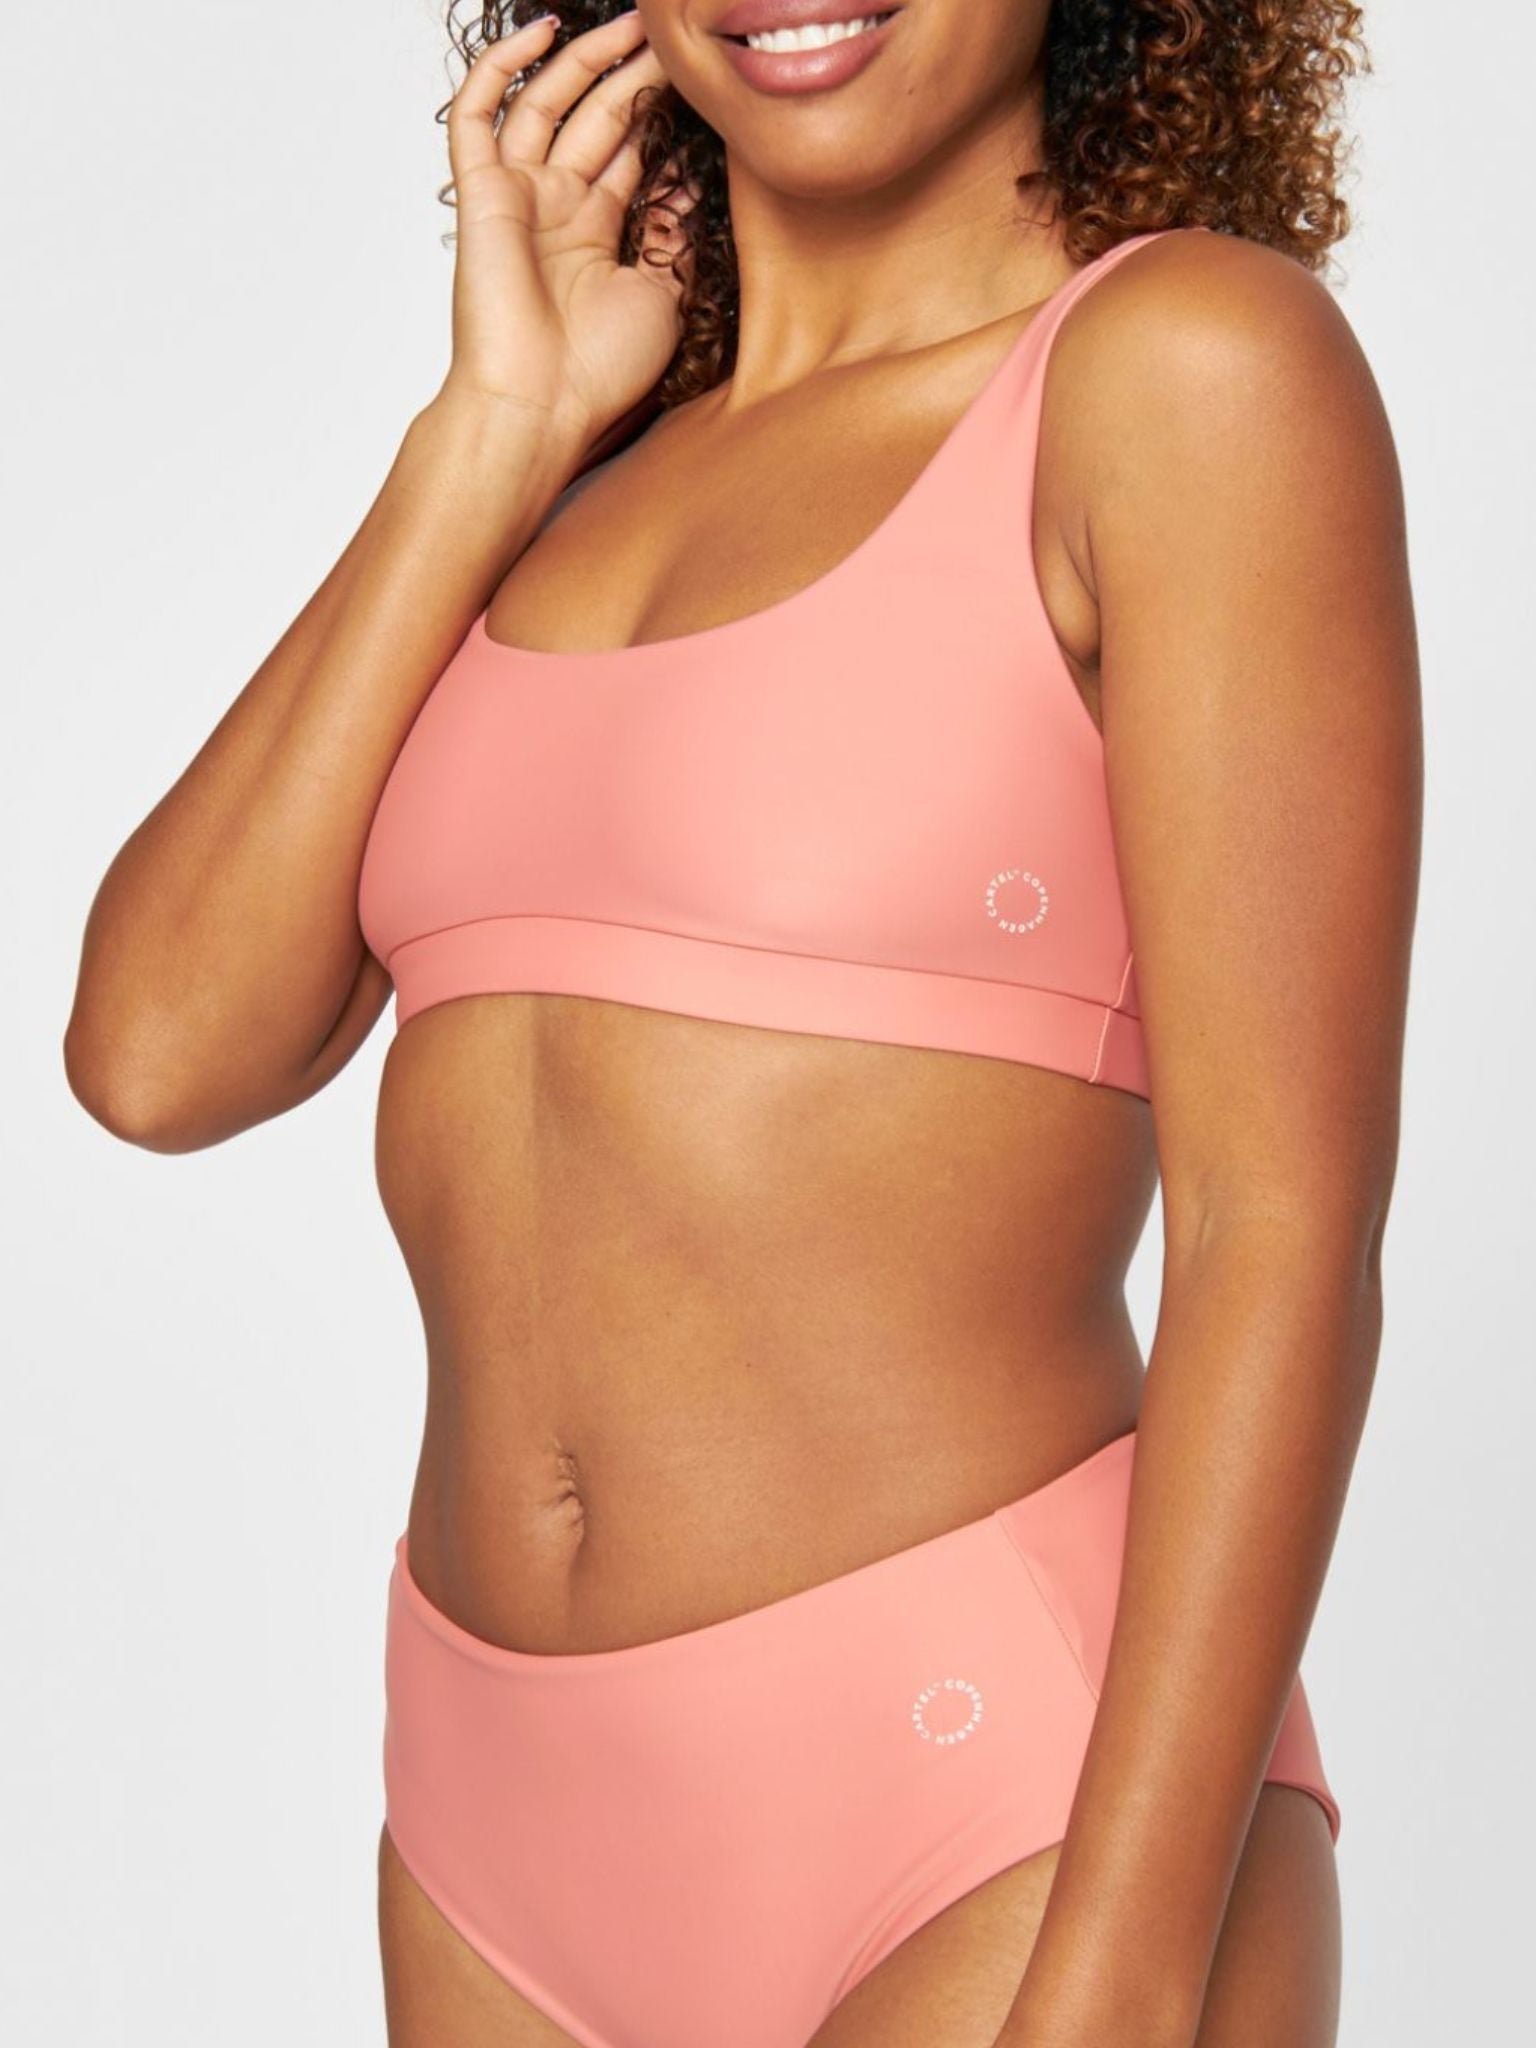 Bikini top and sports top for women in peach color